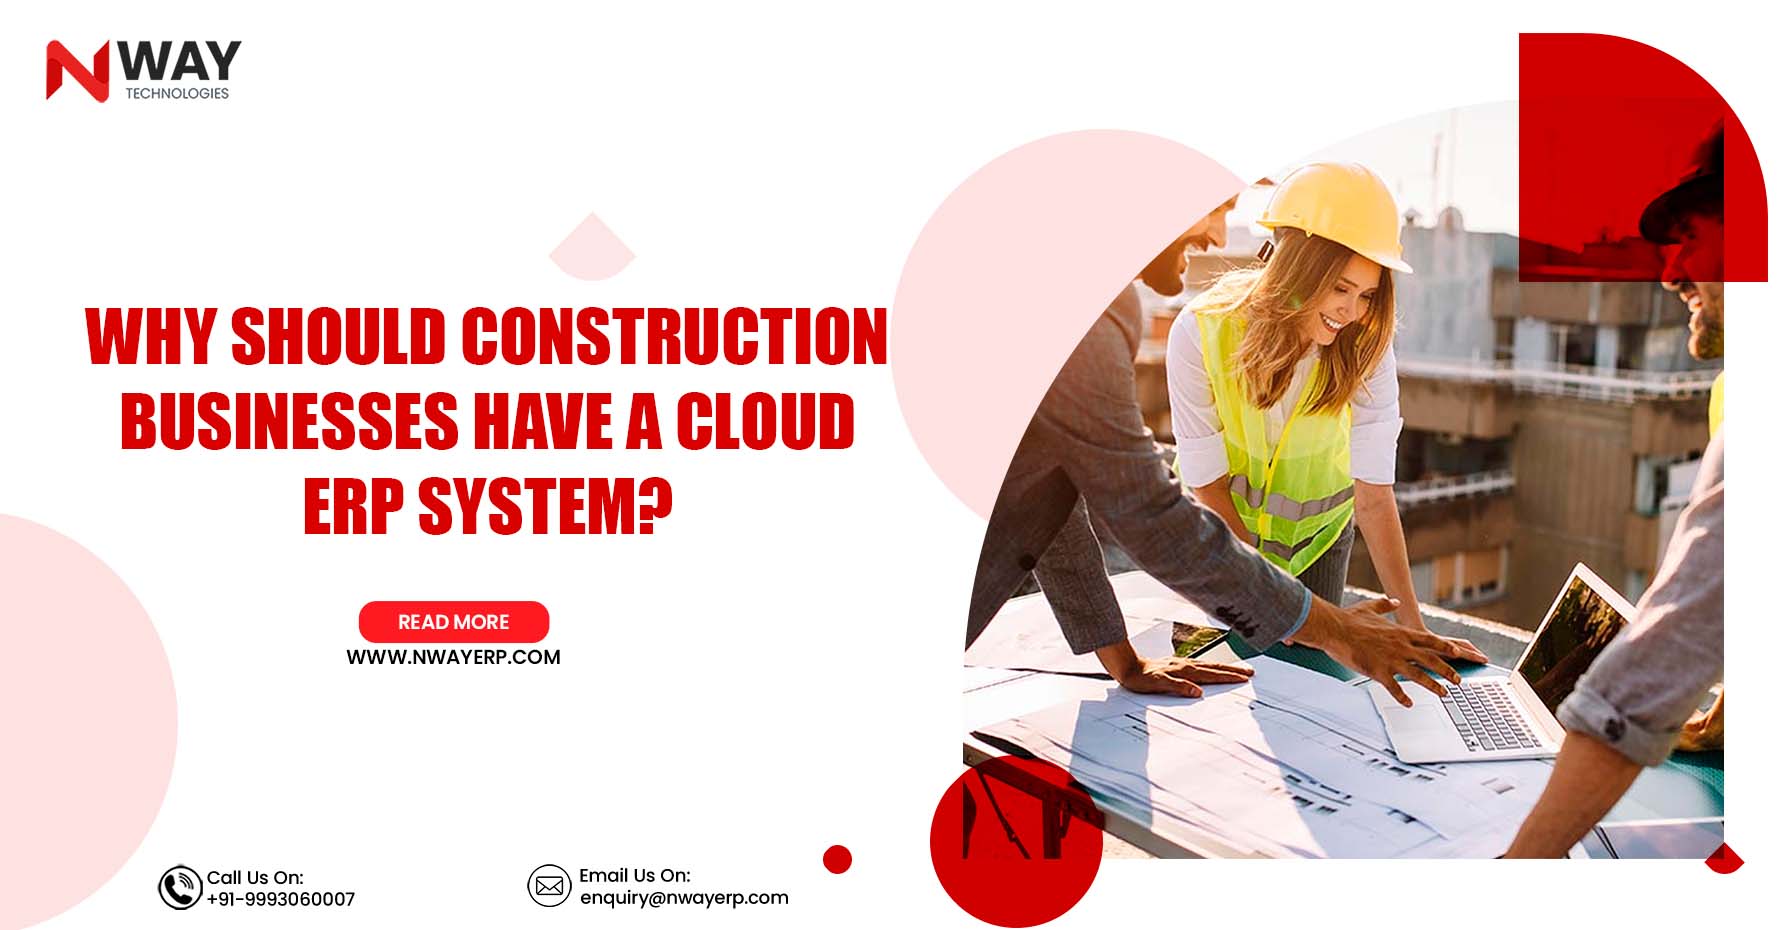 Why should Construction Businesses have a Cloud ERP System?